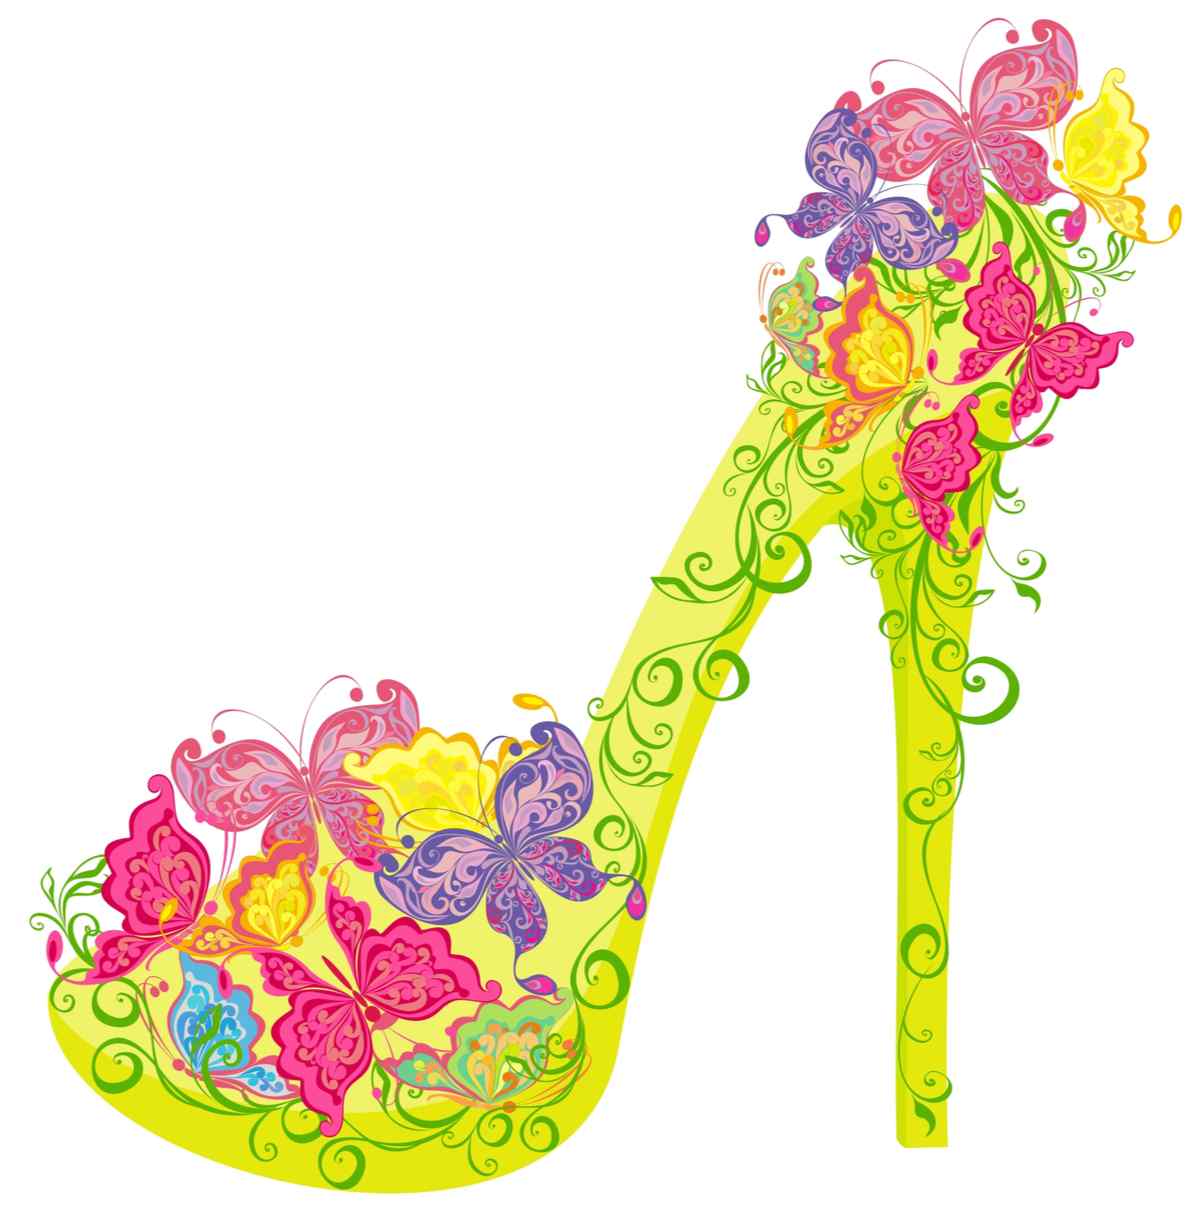 An elaborately decorated illustration of one of the Muses shoes handed out at Mardi Gras as signature throw - this particular shoe is lime green with butterflies on the heel and toe.